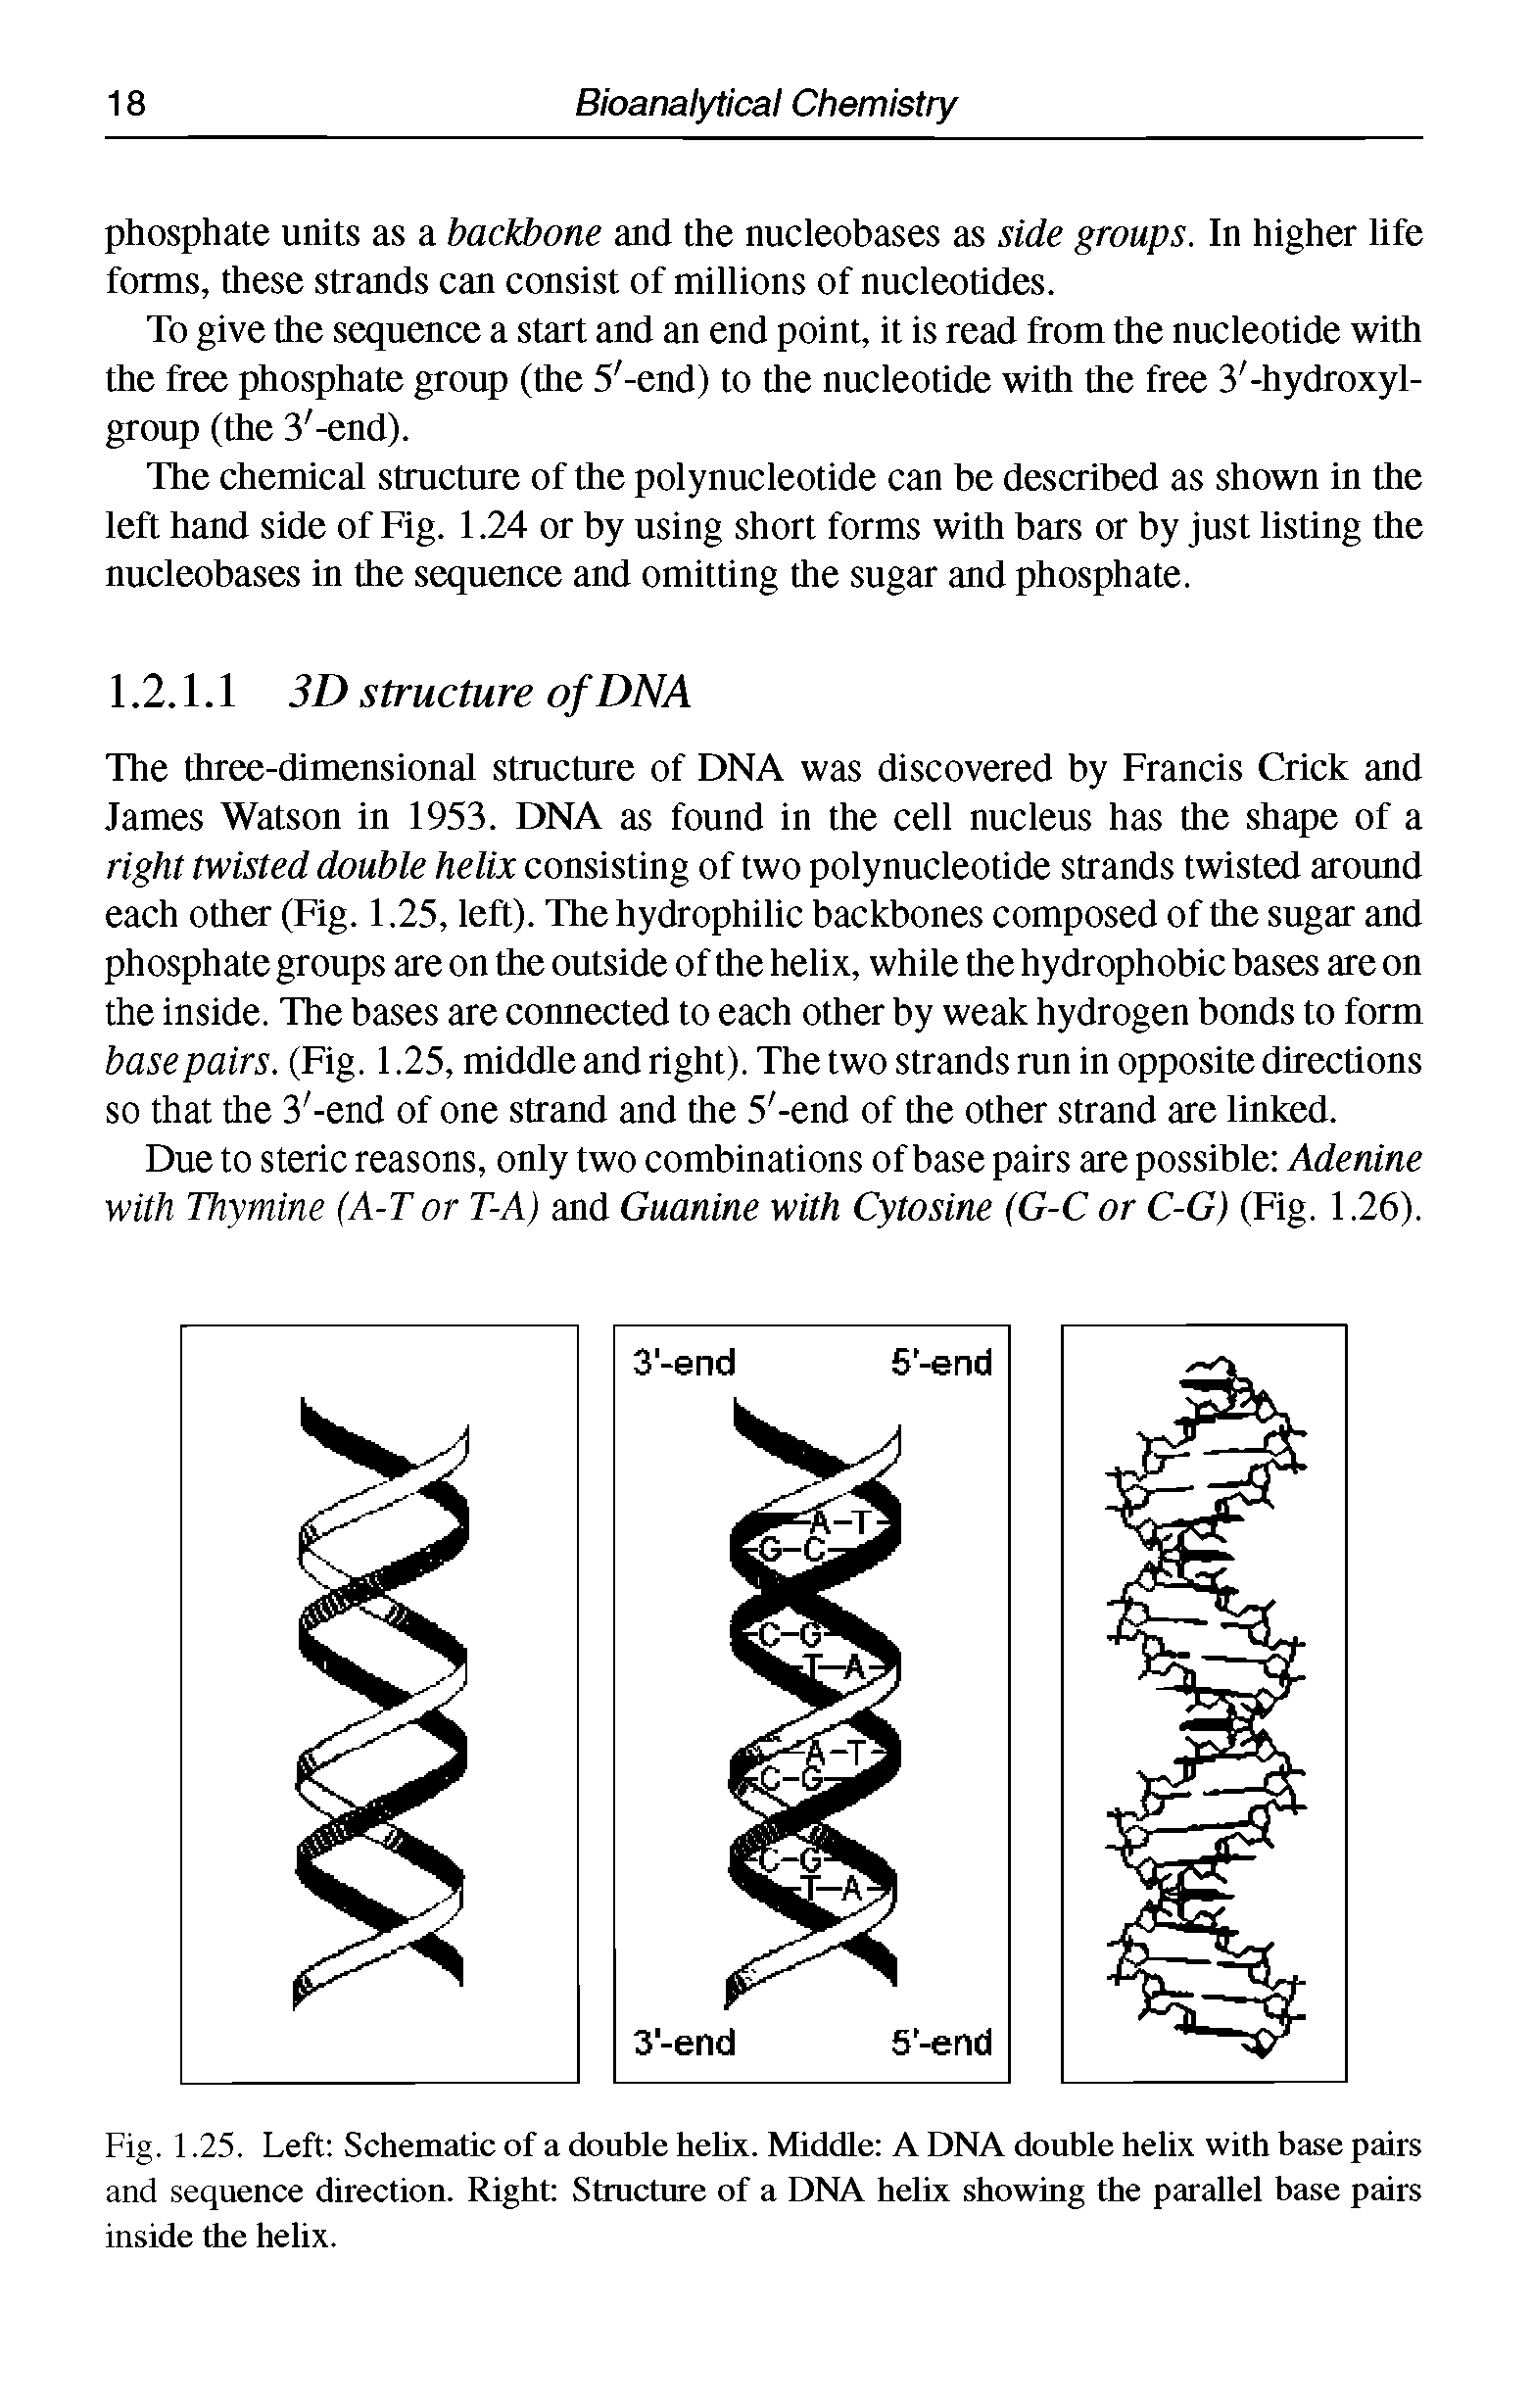 Fig. 1.25. Left Schematic of a double hehx. Middle A DNA double helix with base pairs and sequence direction. Right Structure of a DNA helix showing the parallel base pairs inside the helix.